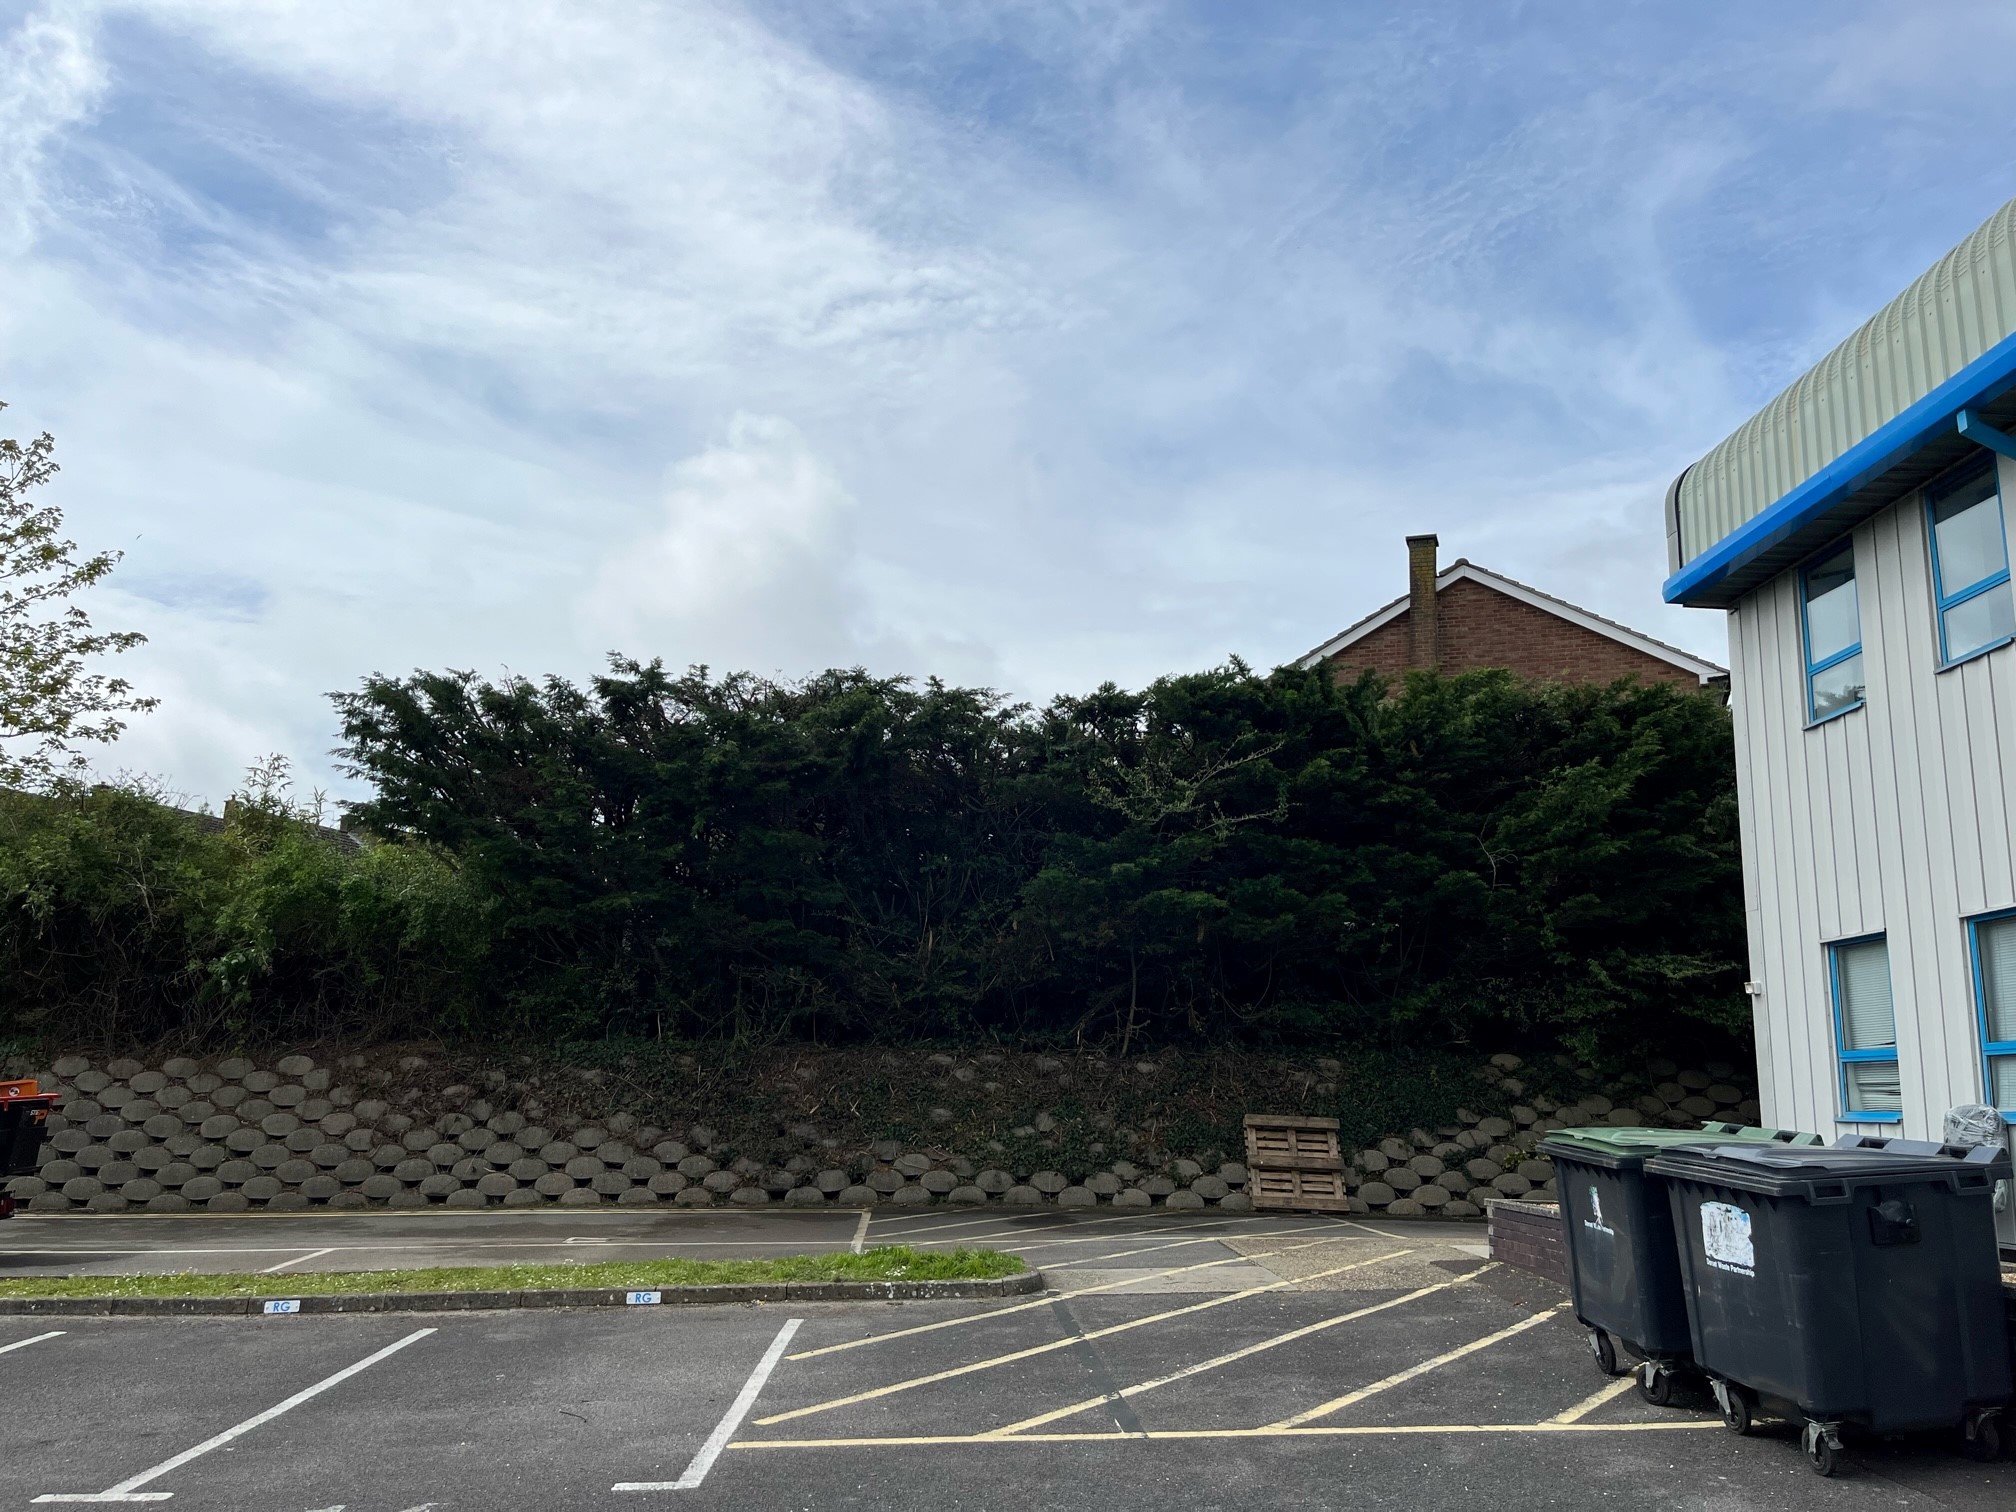 Hedge Reduction Service in Weymouth, Dorchester, Portland, Dorset